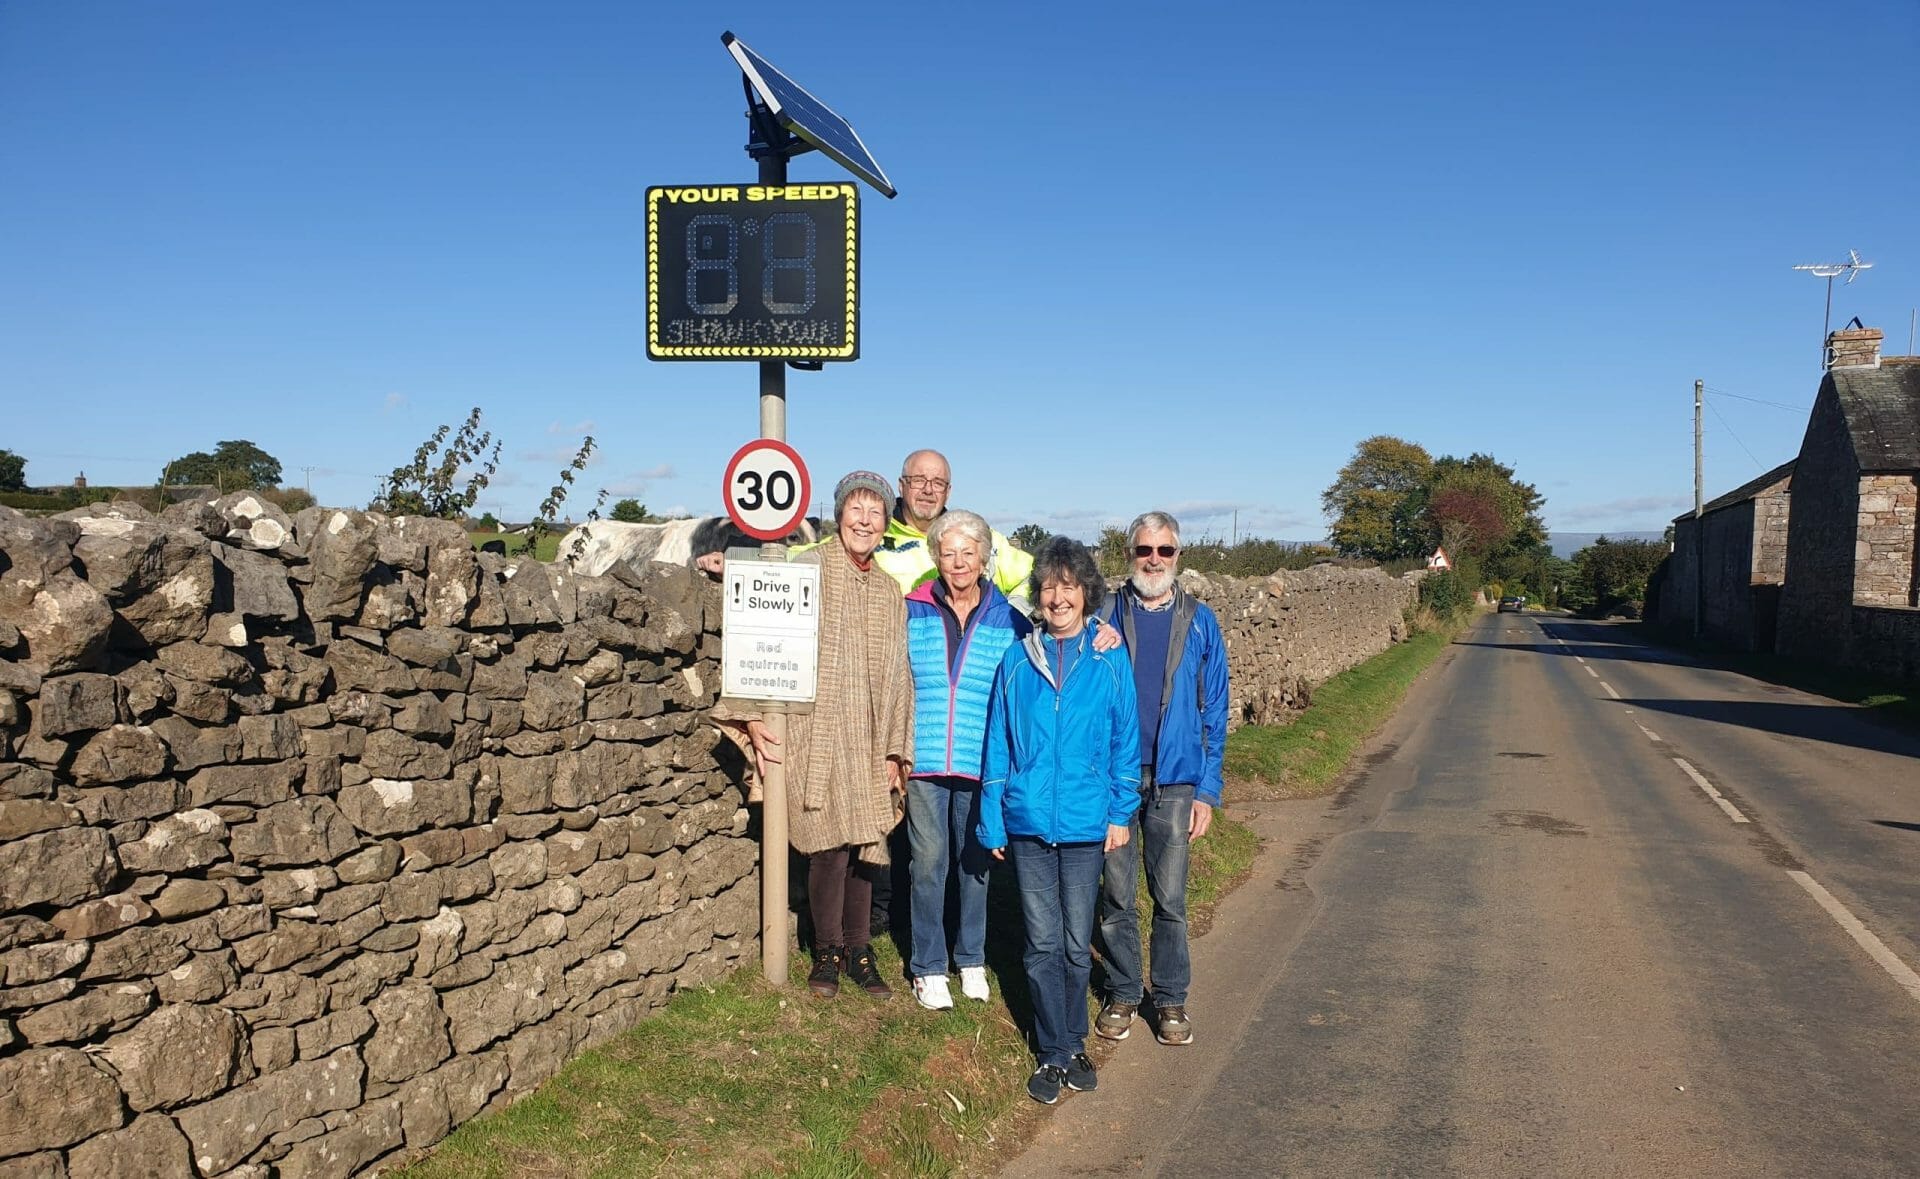 New speed device installed in Tirril after community campaign 